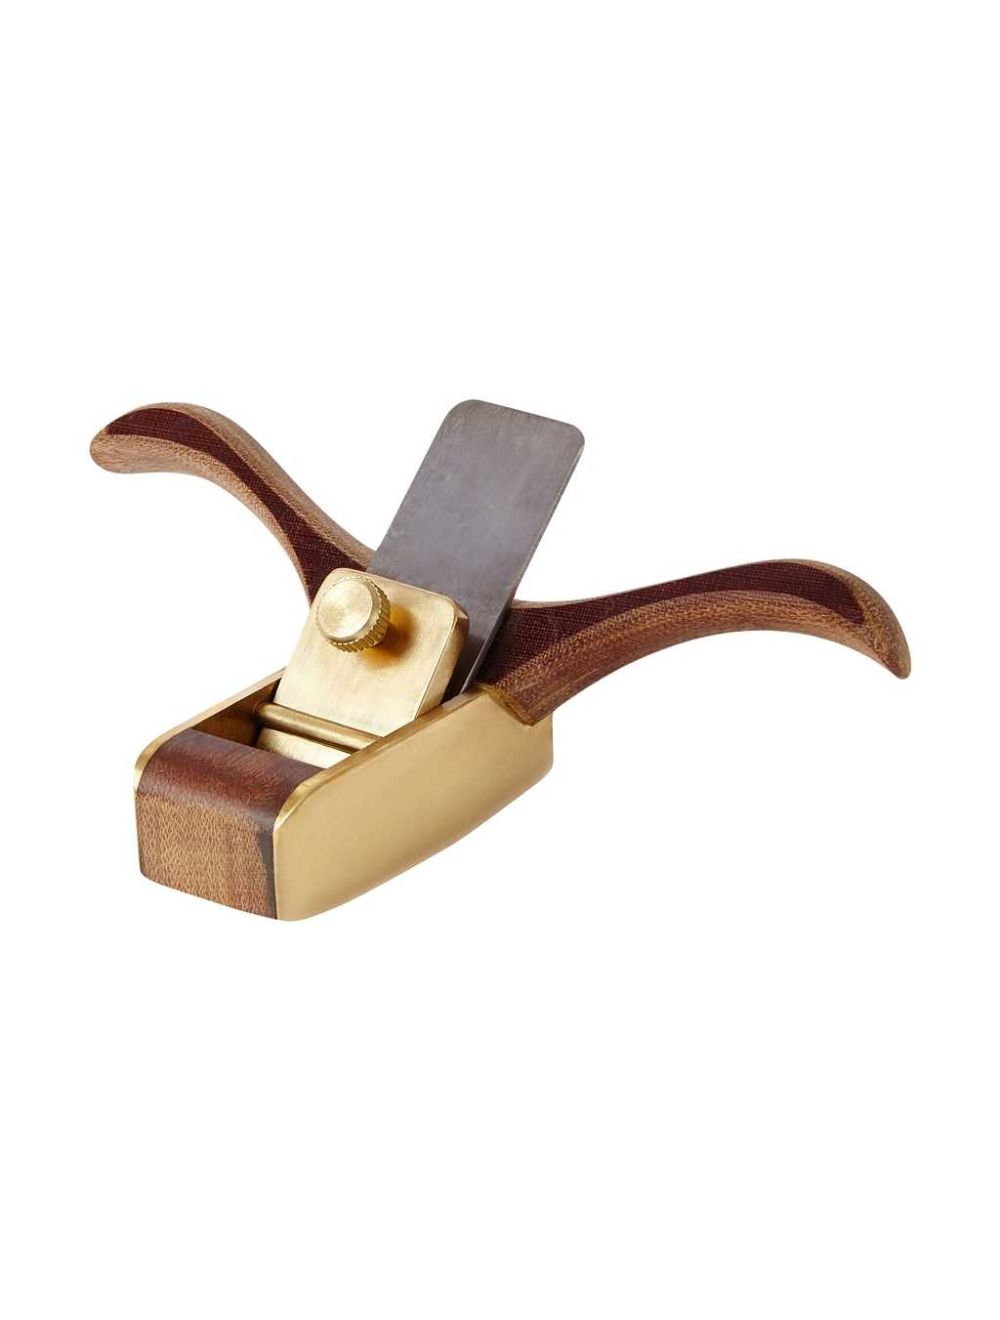 Curved-sole Plane / Spokeshave 20mm